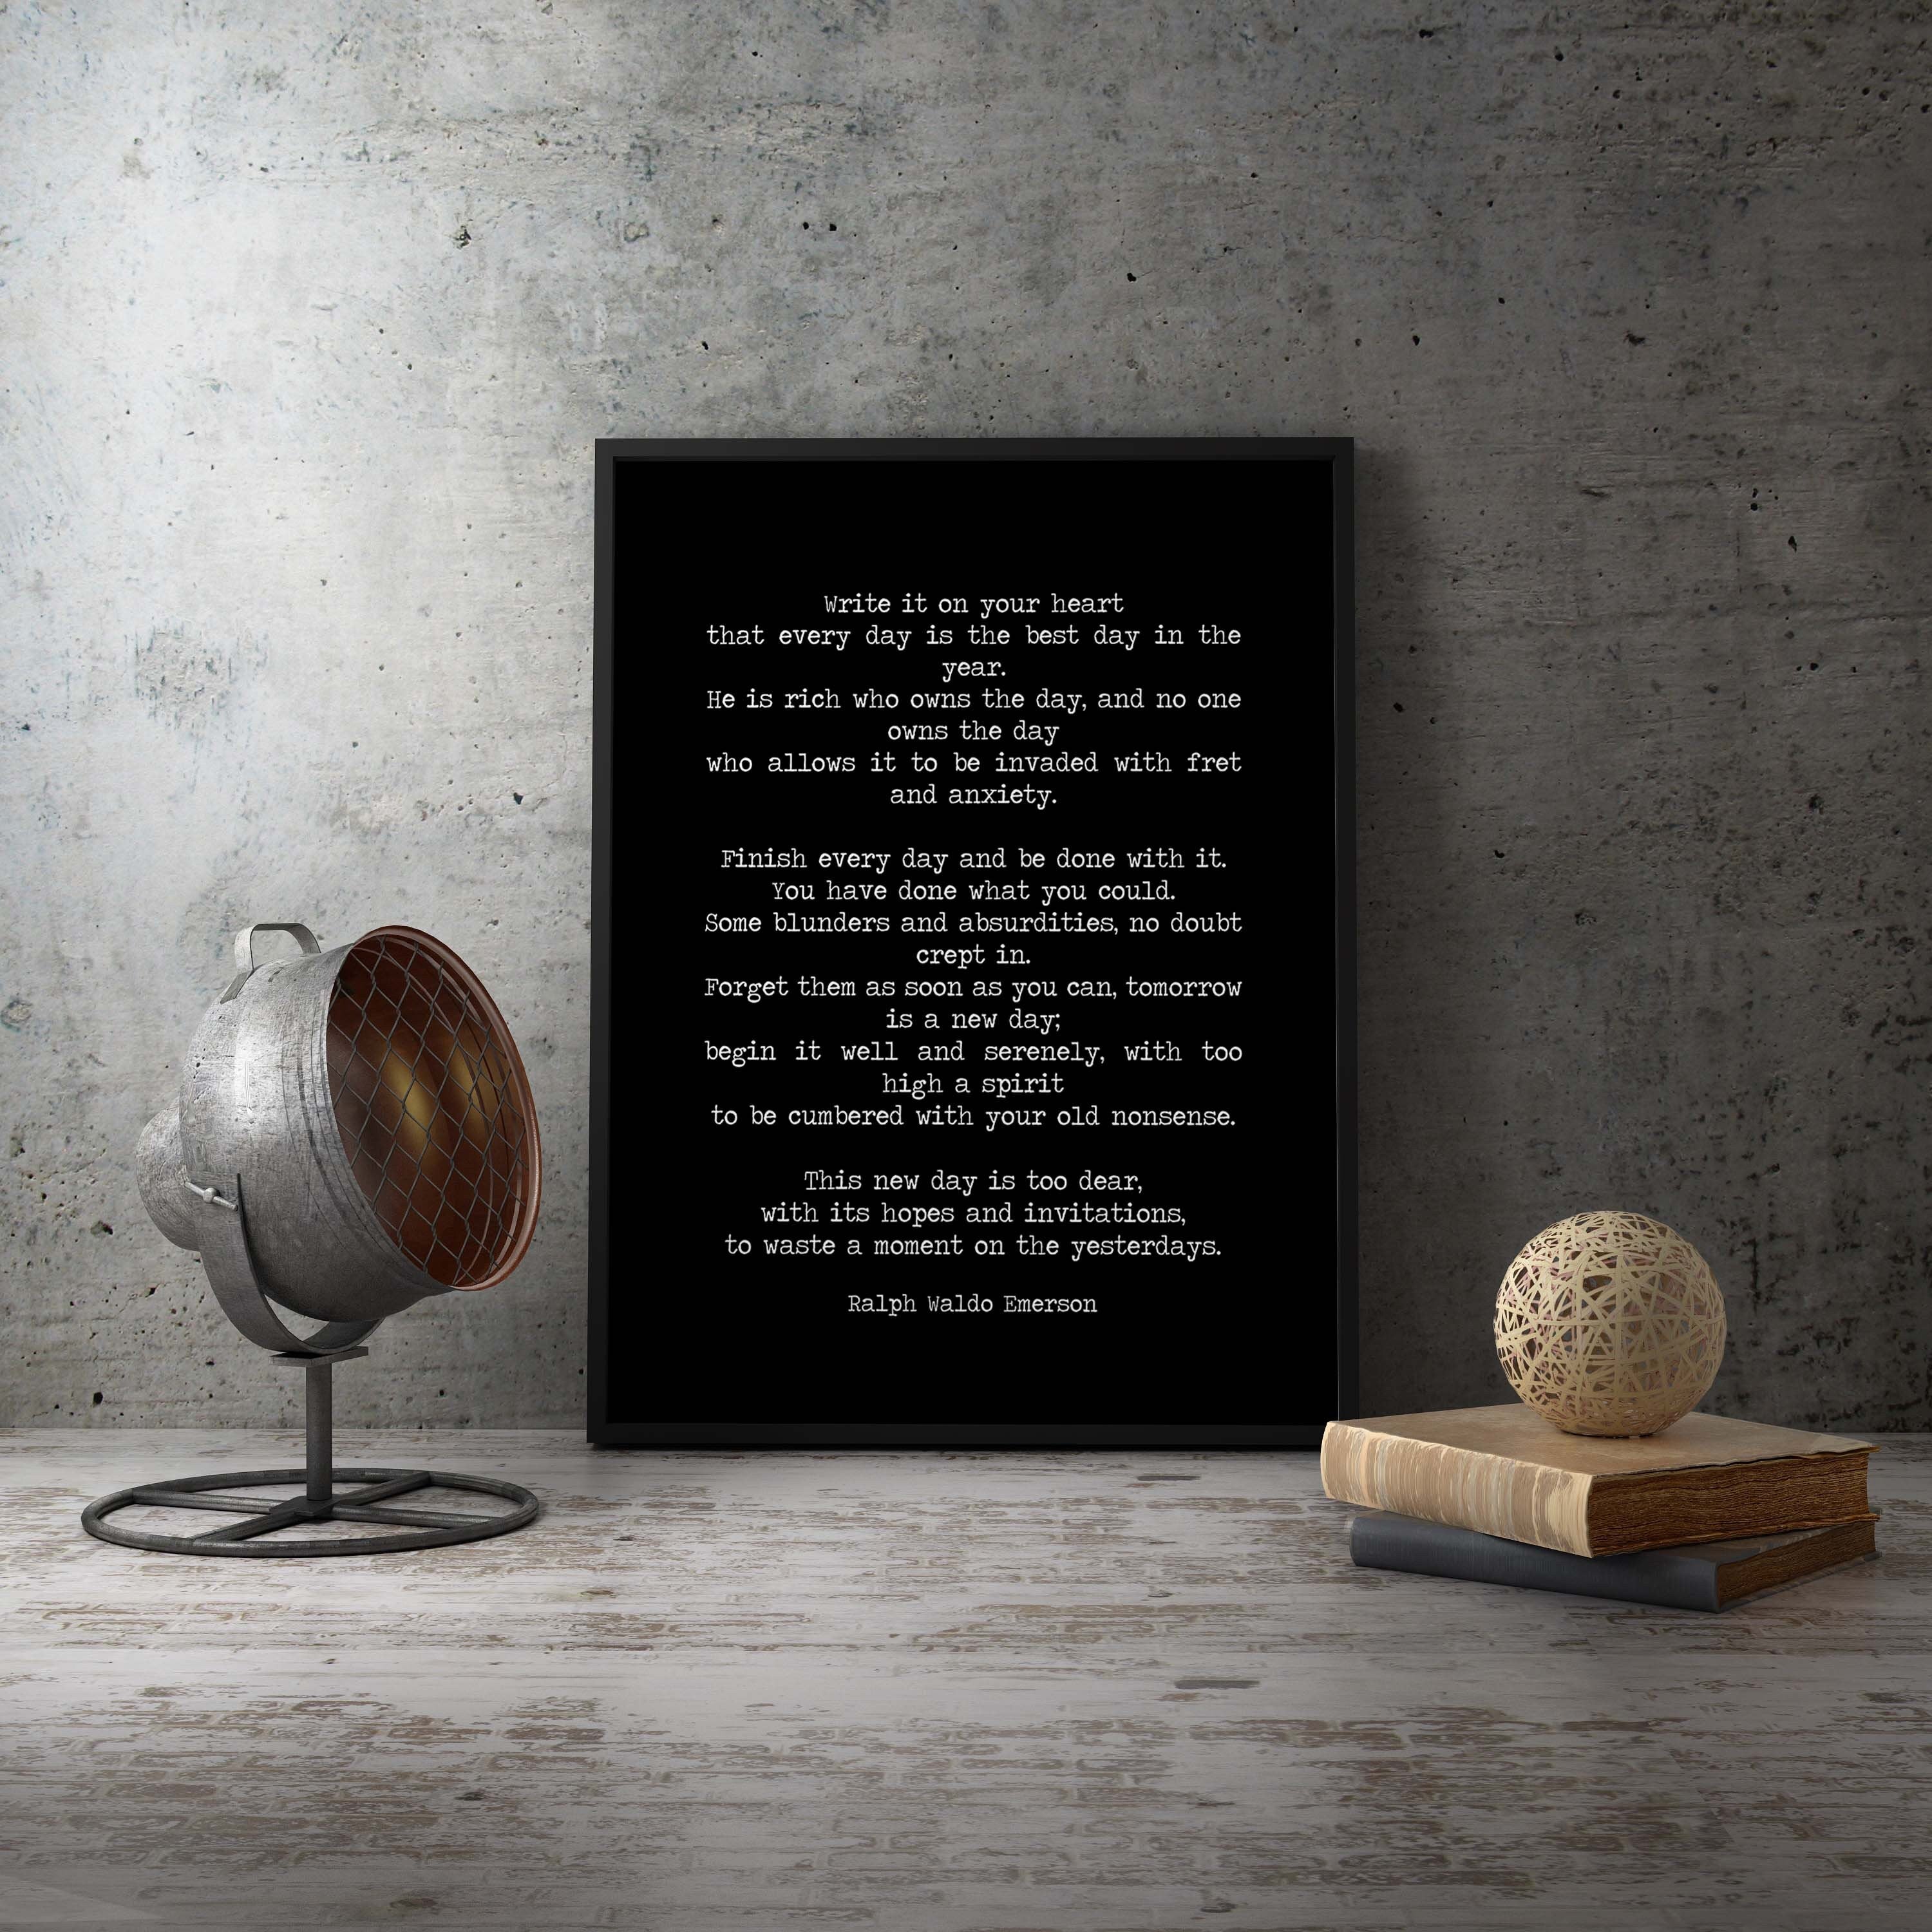 Ralph Waldo Emerson Quote Print, He Is Rich Who Owns The Day Black & White Inspirational Print For Home Decor